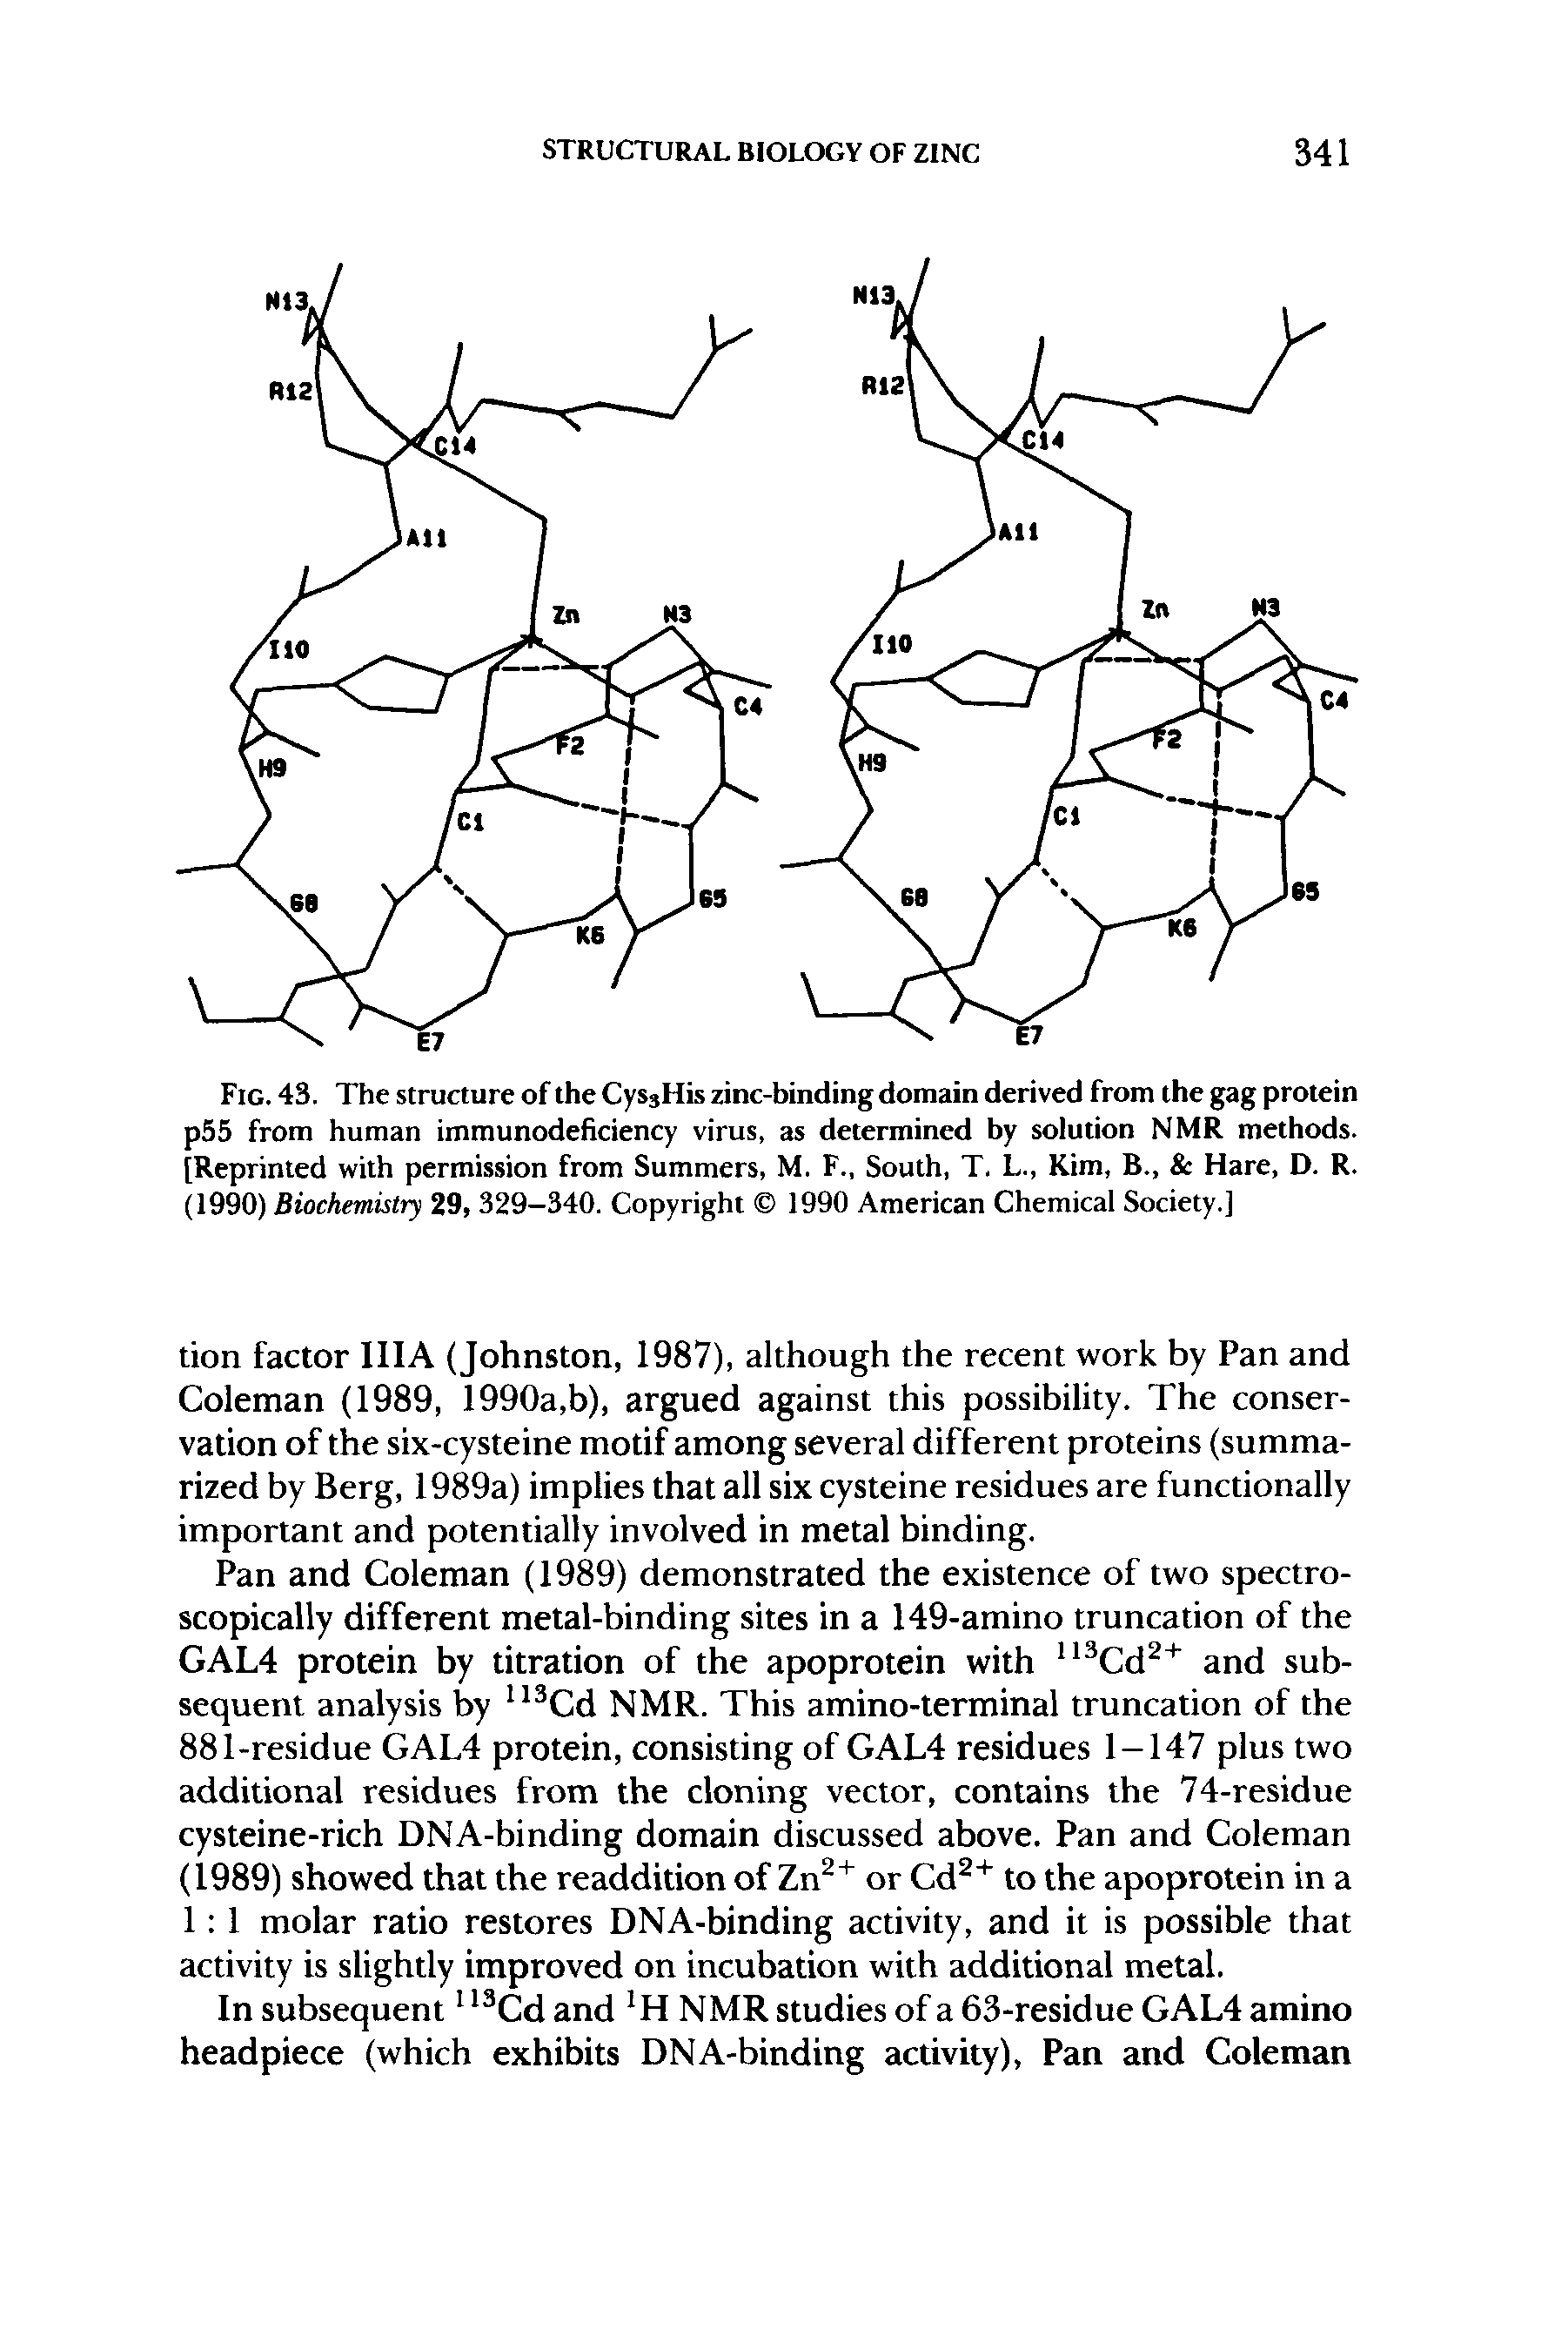 Fig. 43. The structure of the CyssHis zinc-binding domain derived from the gag protein p55 from human immunodeficiency virus, as determined by solution NMR methods. [Reprinted with permission from Summers, M. F., South, T. L., Kim, B., Hare, D. R. (1990) Biochemistry 29, 329-340. Copyright 1990 American Chemical Society.]...